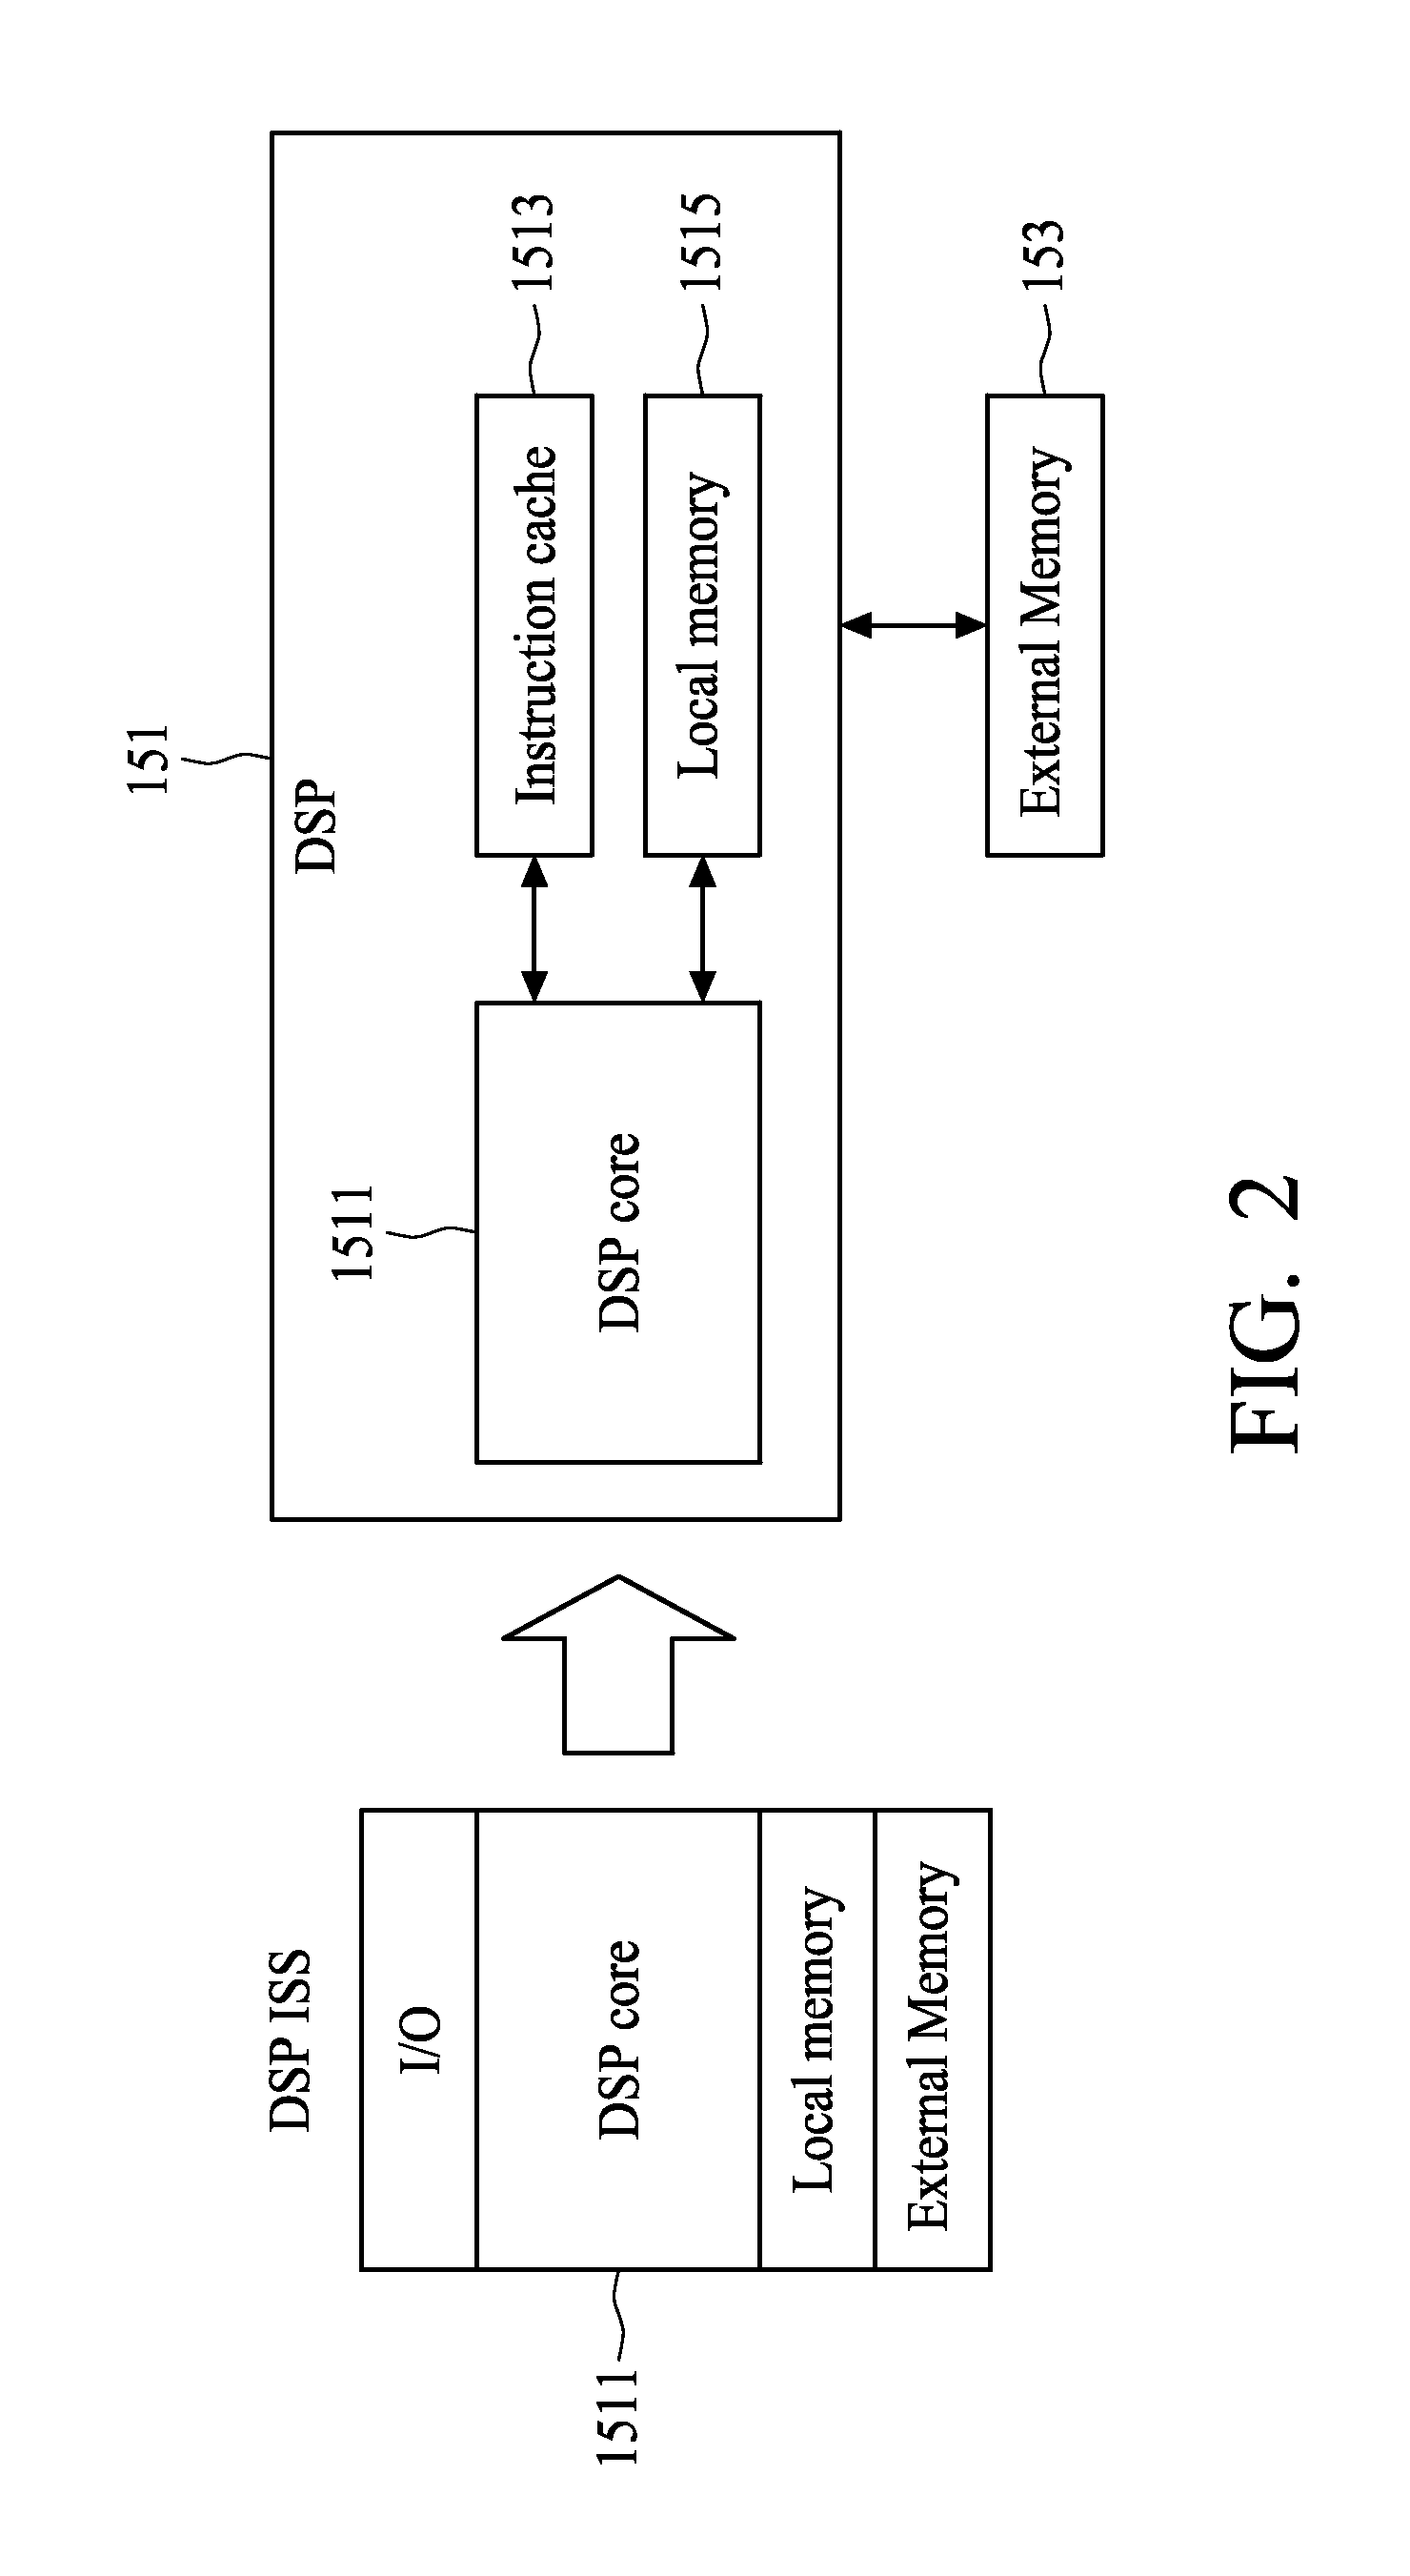 Power aware simulation system with embedded multi-core DSP